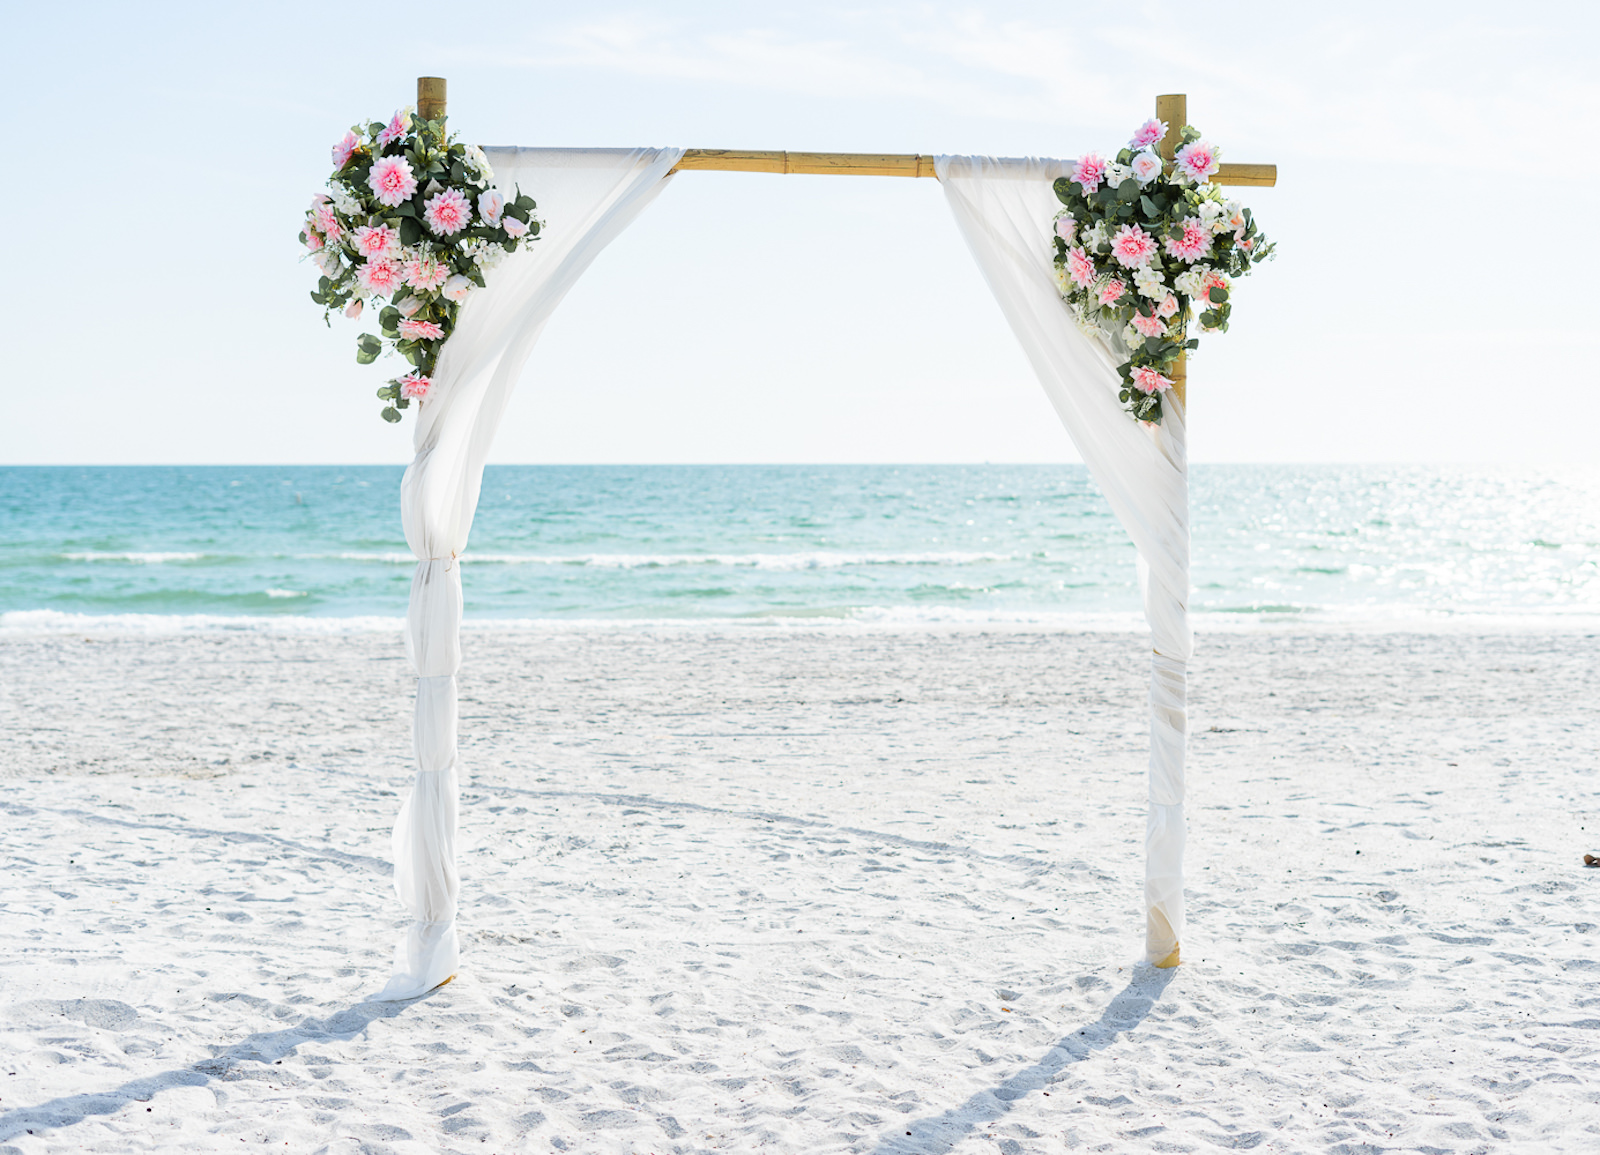 St. Petersburg Florida Beach Wedding Ceremony | Bamboo Arch Backdrop with Sheer White Draping and Blush Pink Floral Arrangements